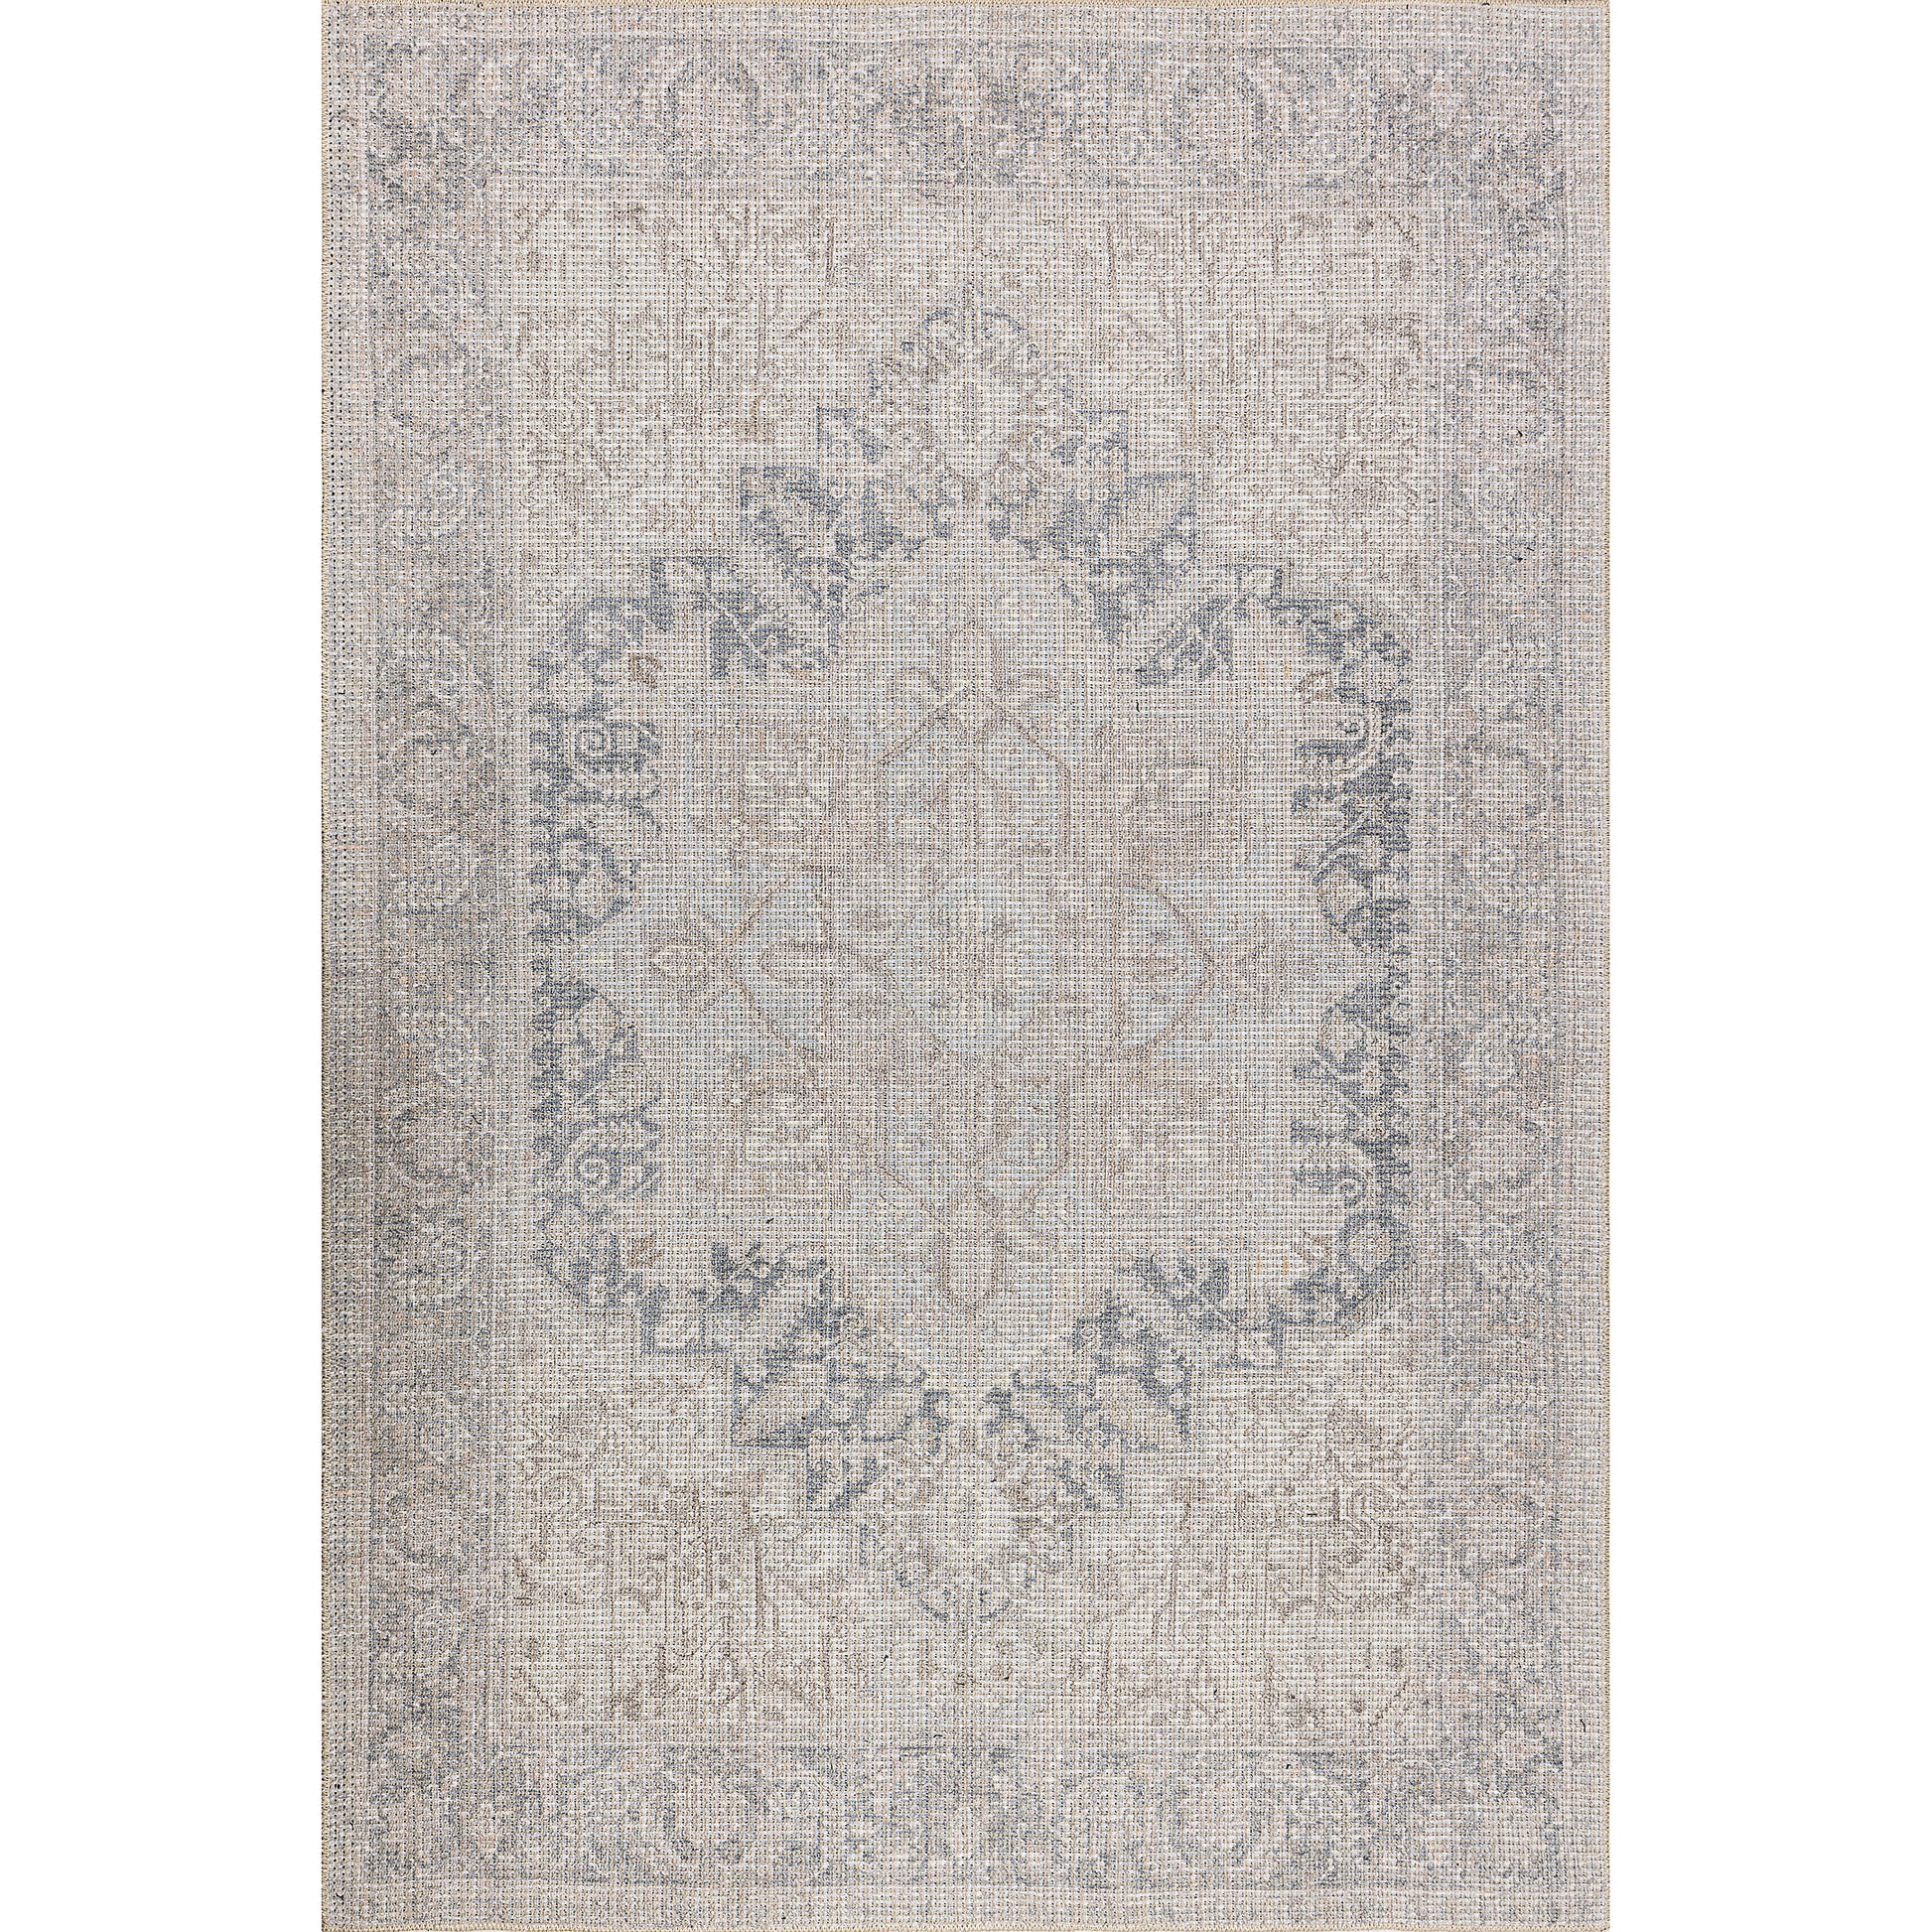 grey blue medallion cotton and polyster machine washable traditional rustic area rug 2x5, 3x5 Runner Rug, Entry Way, Entrance, Balcony, Bedside, Home Office, Table Top